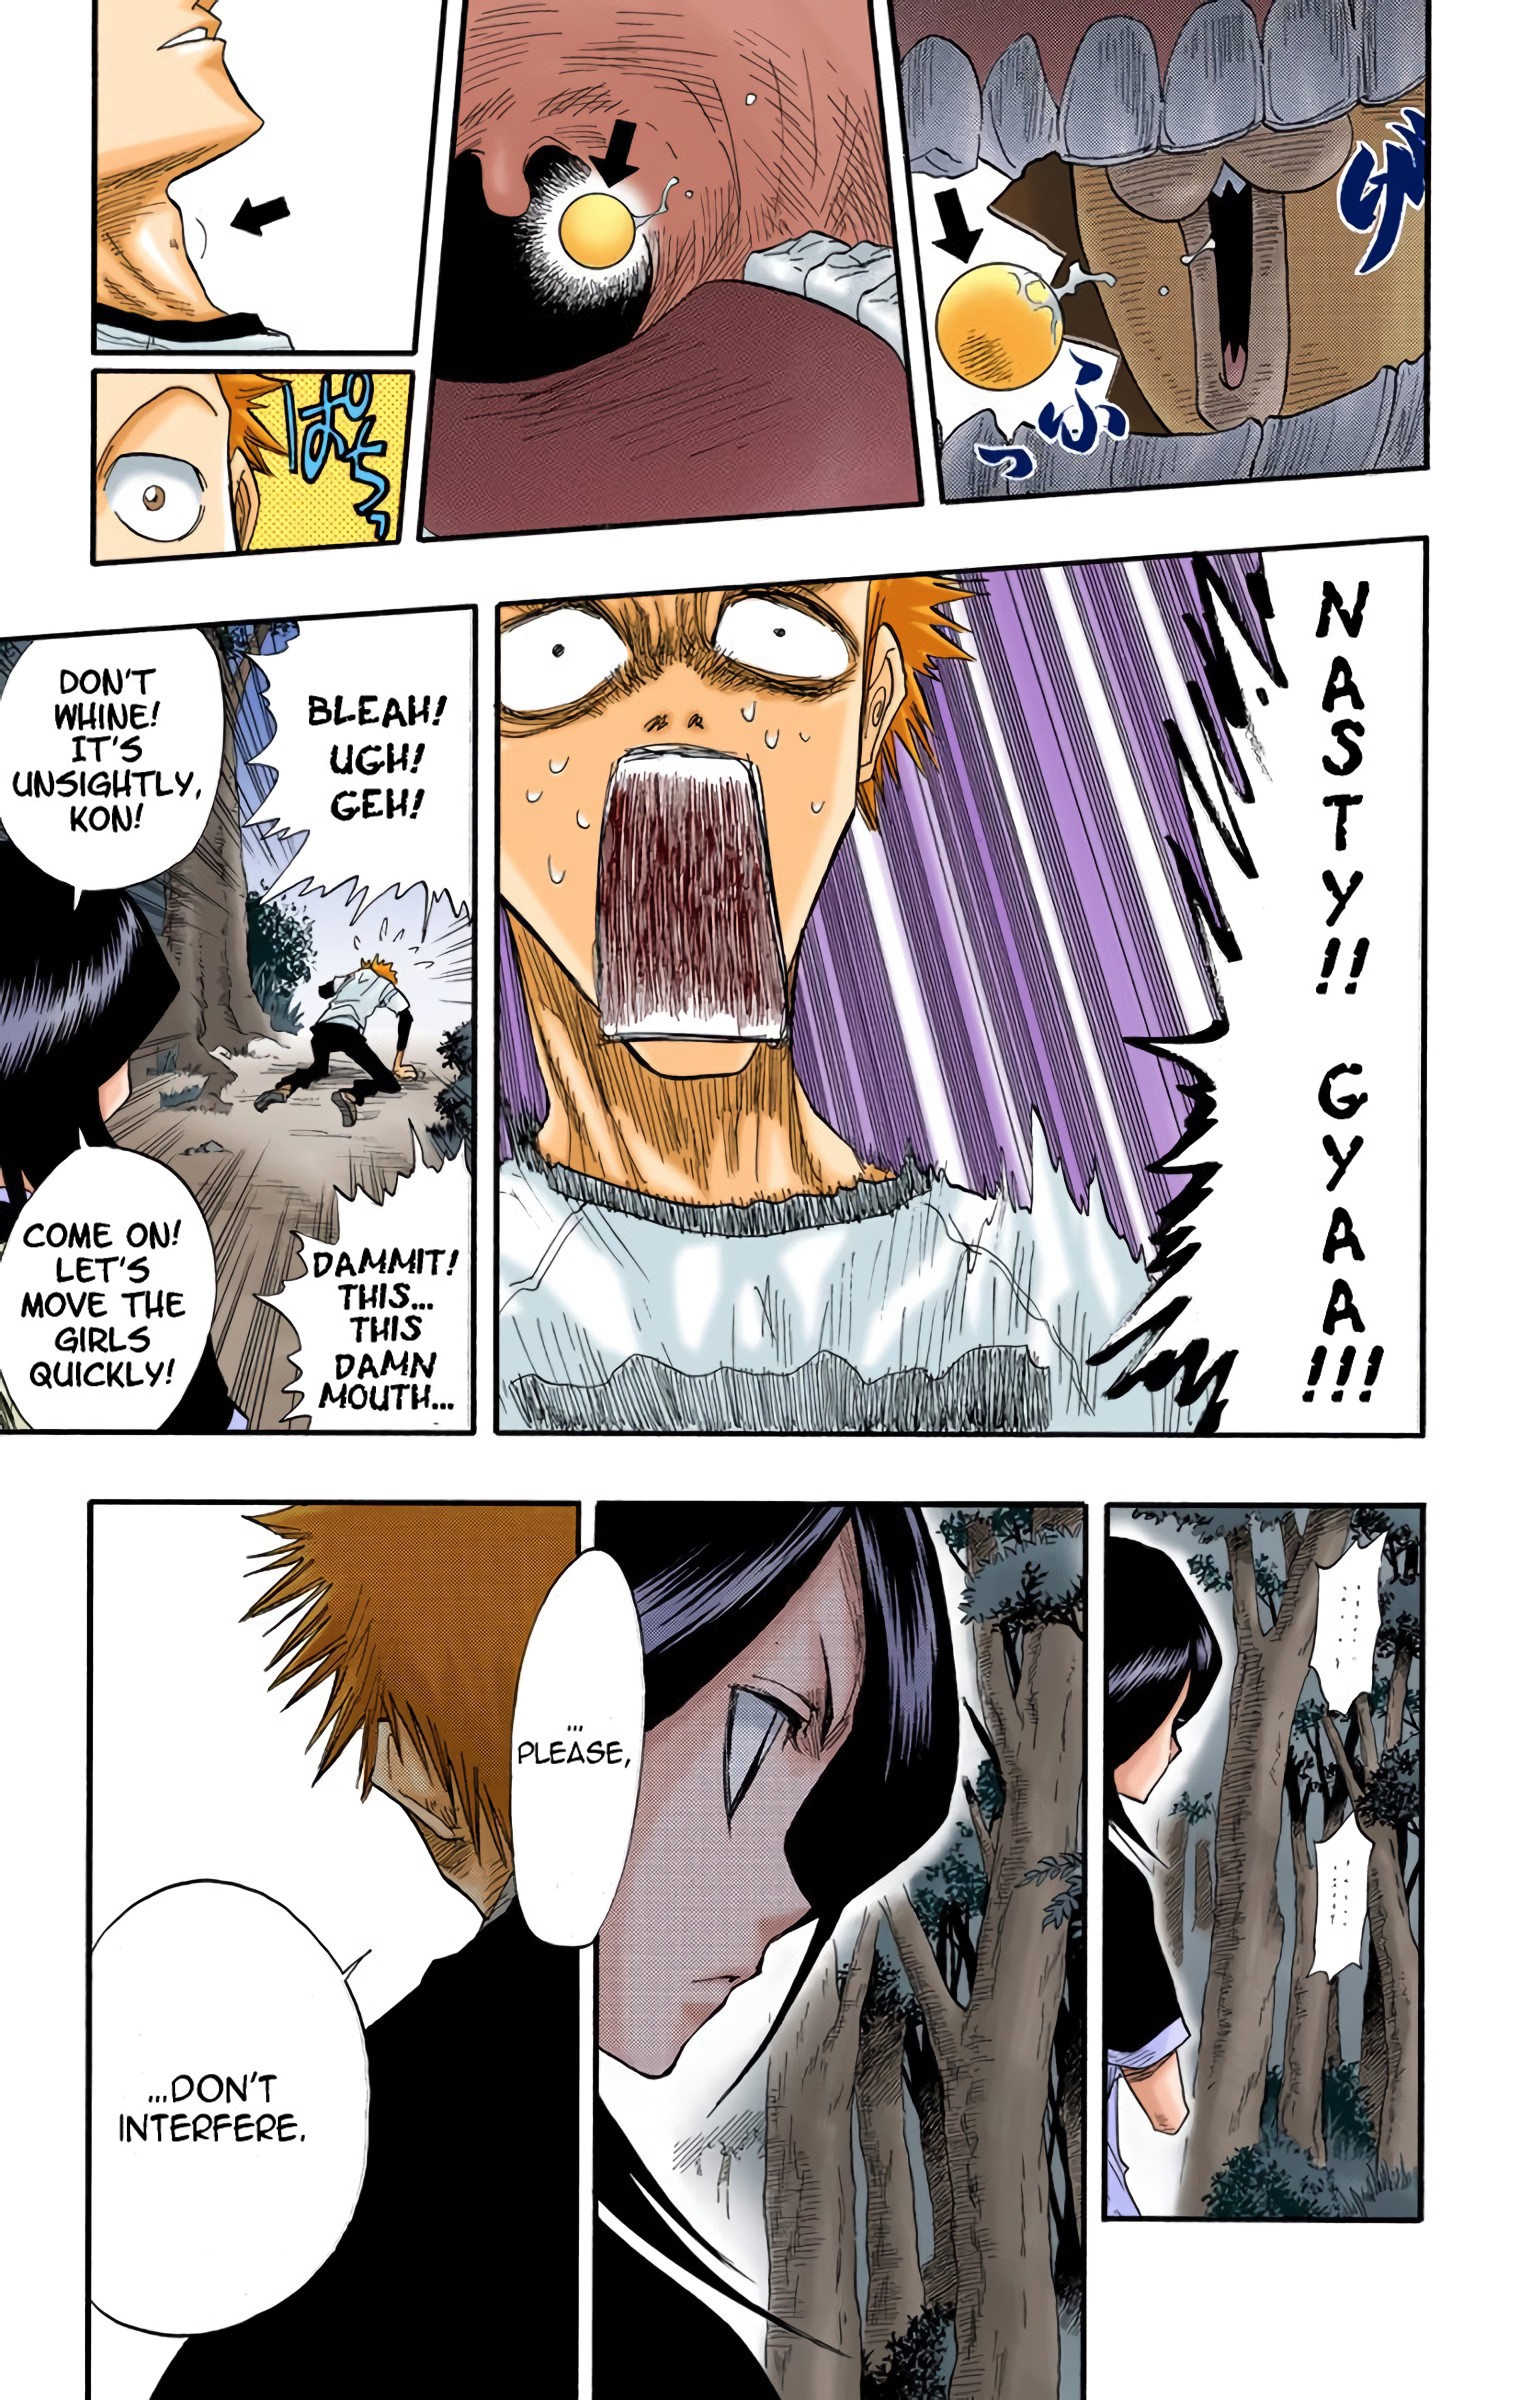 Bleach - Digital Colored Comics Vol.3 Chapter 22: 6/17 Op. 6 A Battle In The Graveyard - Picture 3